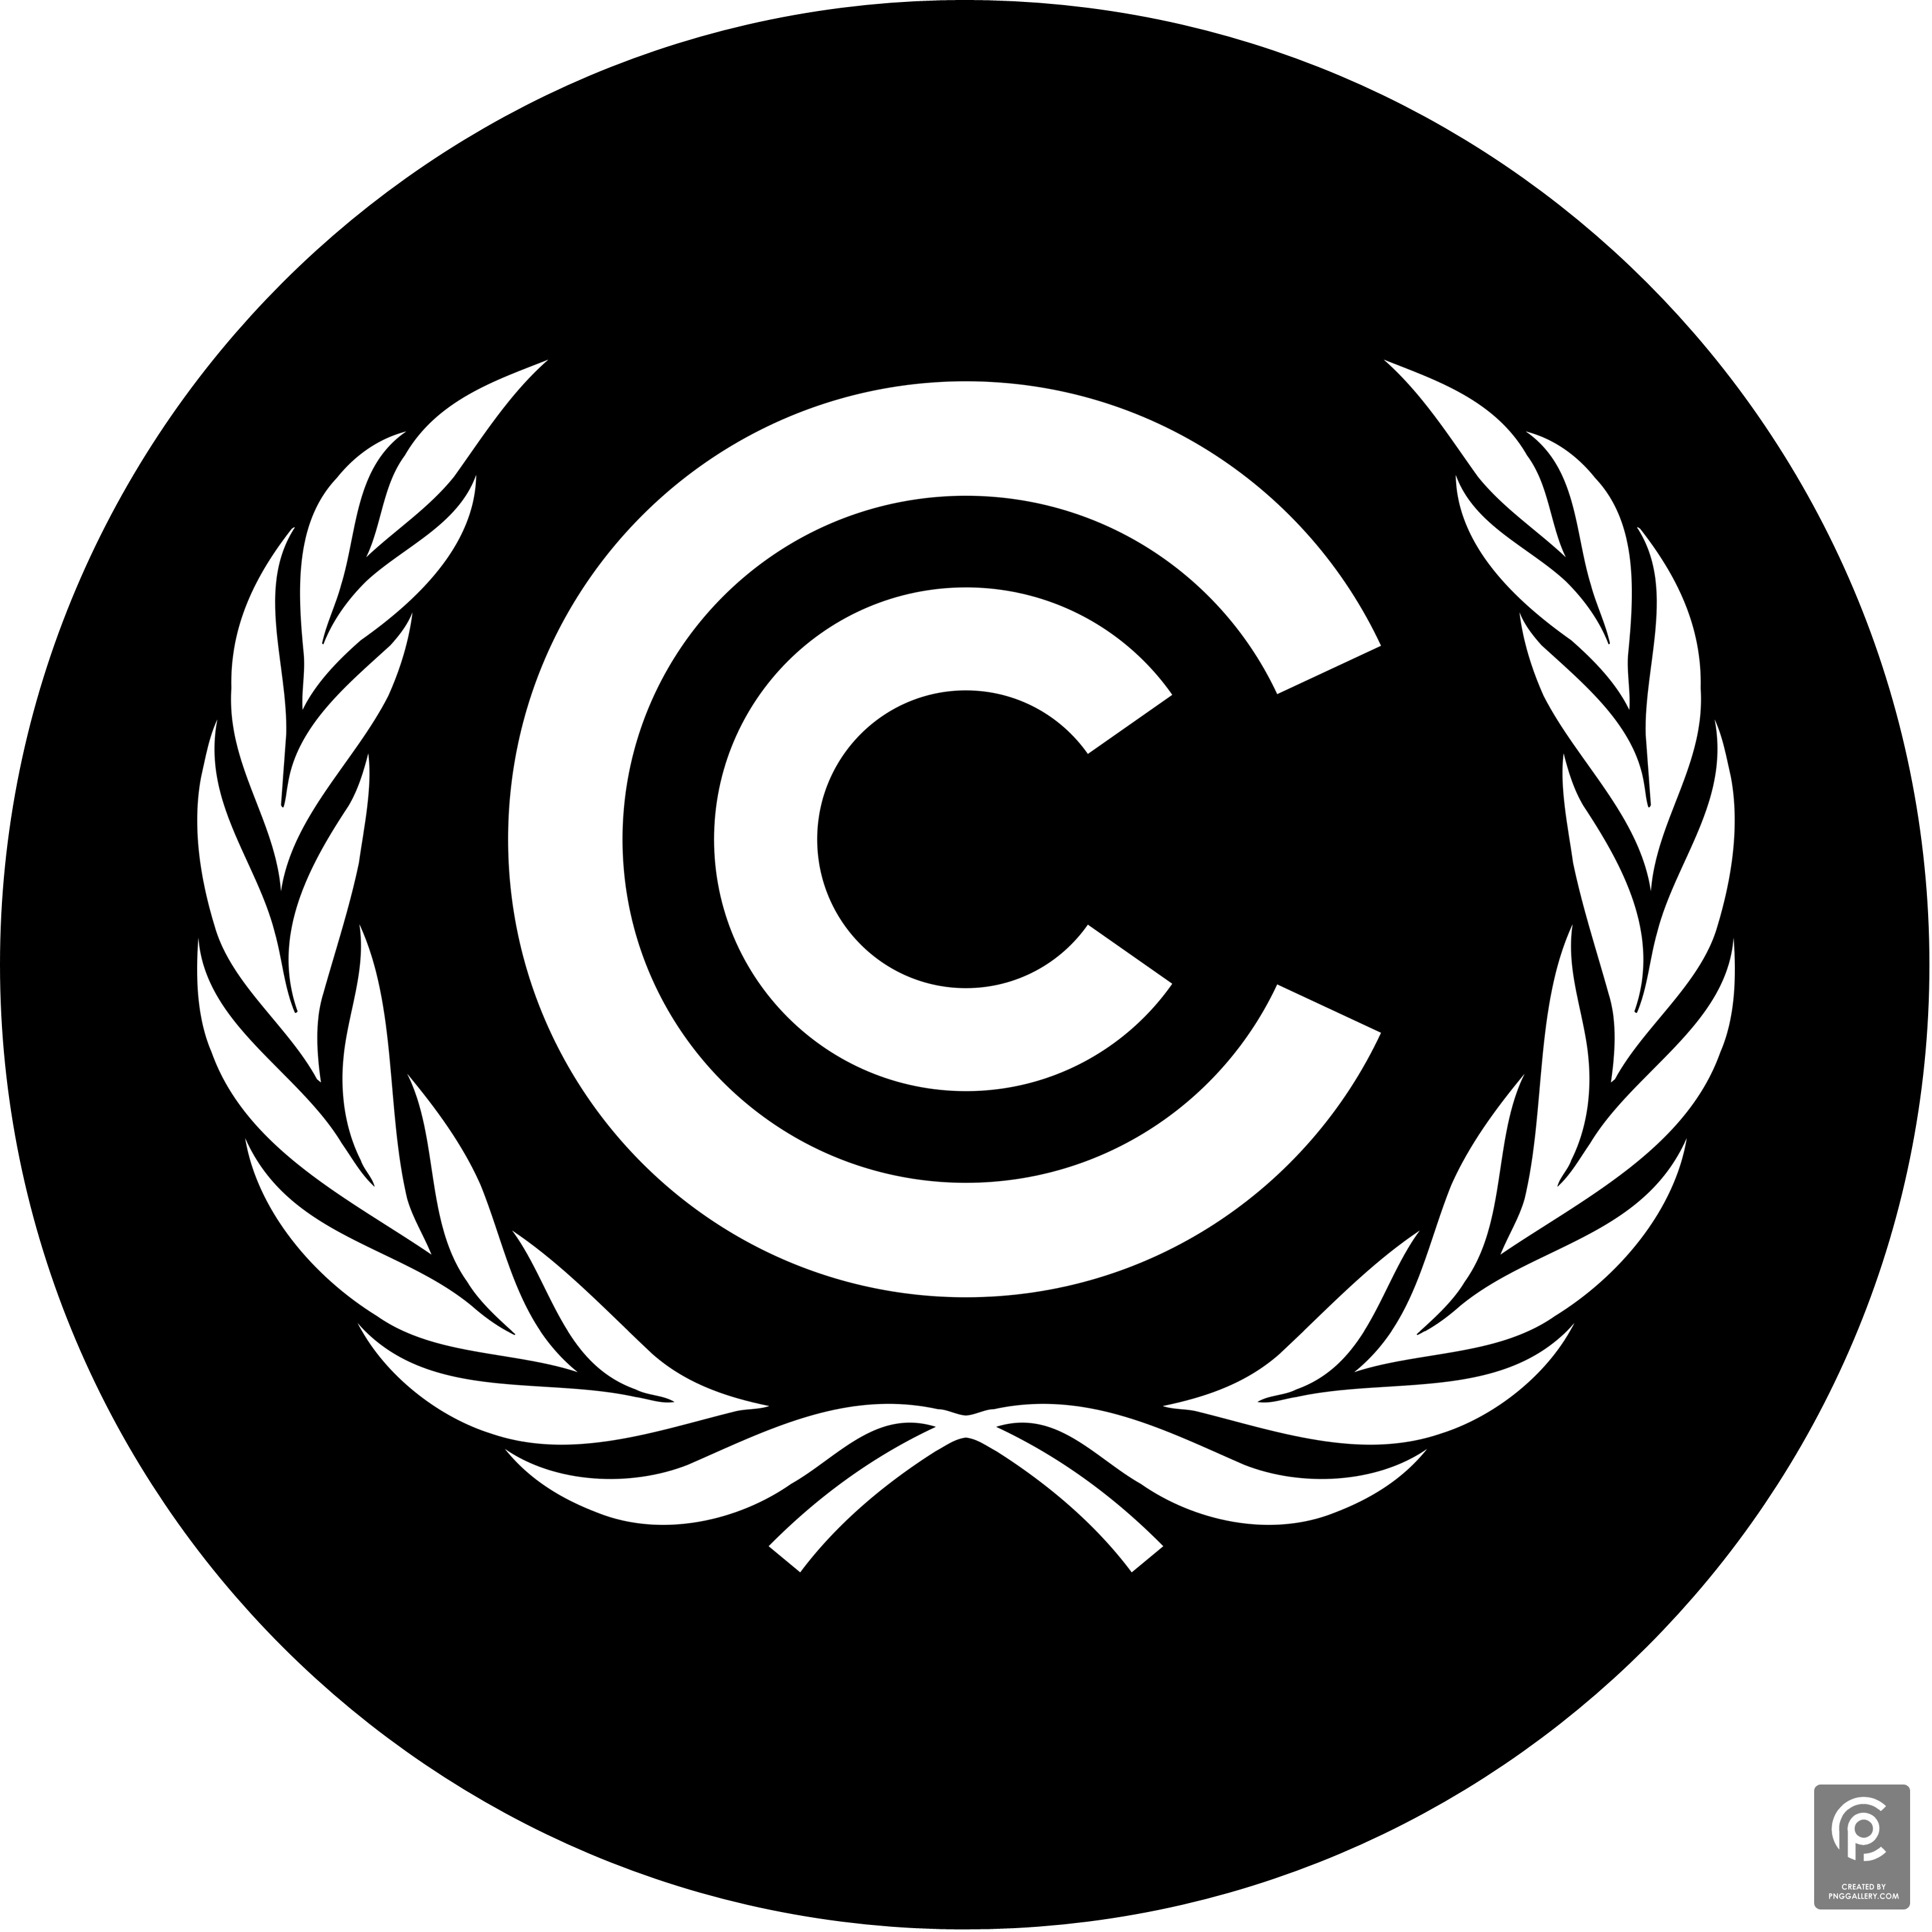 United Nations Climate Change Conference Logo Transparent Clipart